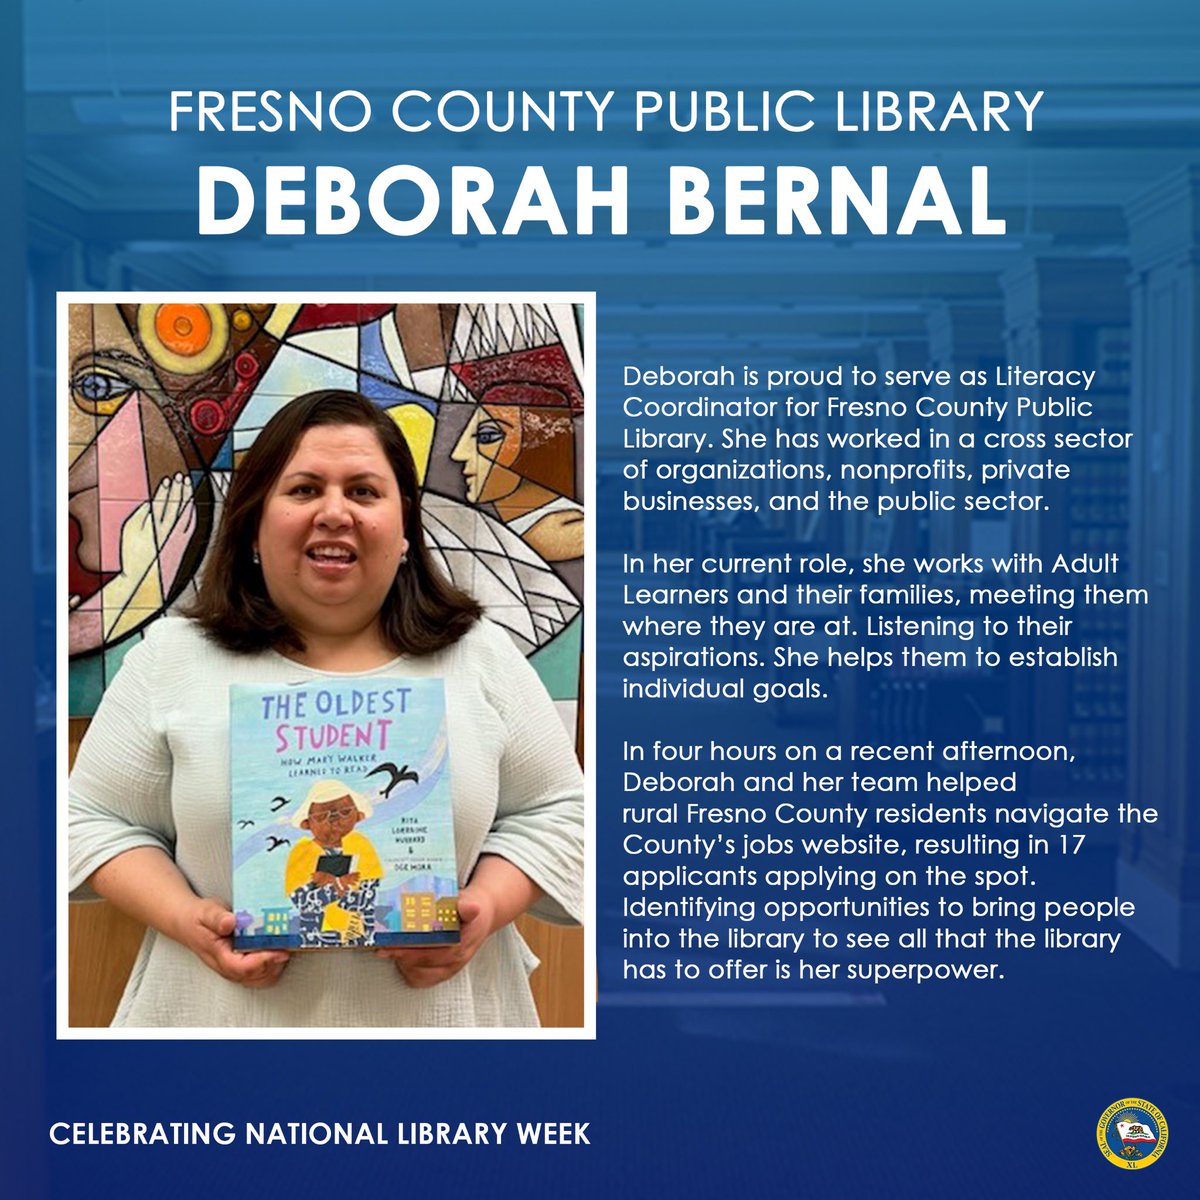 .@FCPL librarian Deborah Bernal is empowering adult learners.

On a recent afternoon, Deborah and her team helped rural Fresno County residents navigate the county’s jobs website so they can learn how to apply for work in their community!